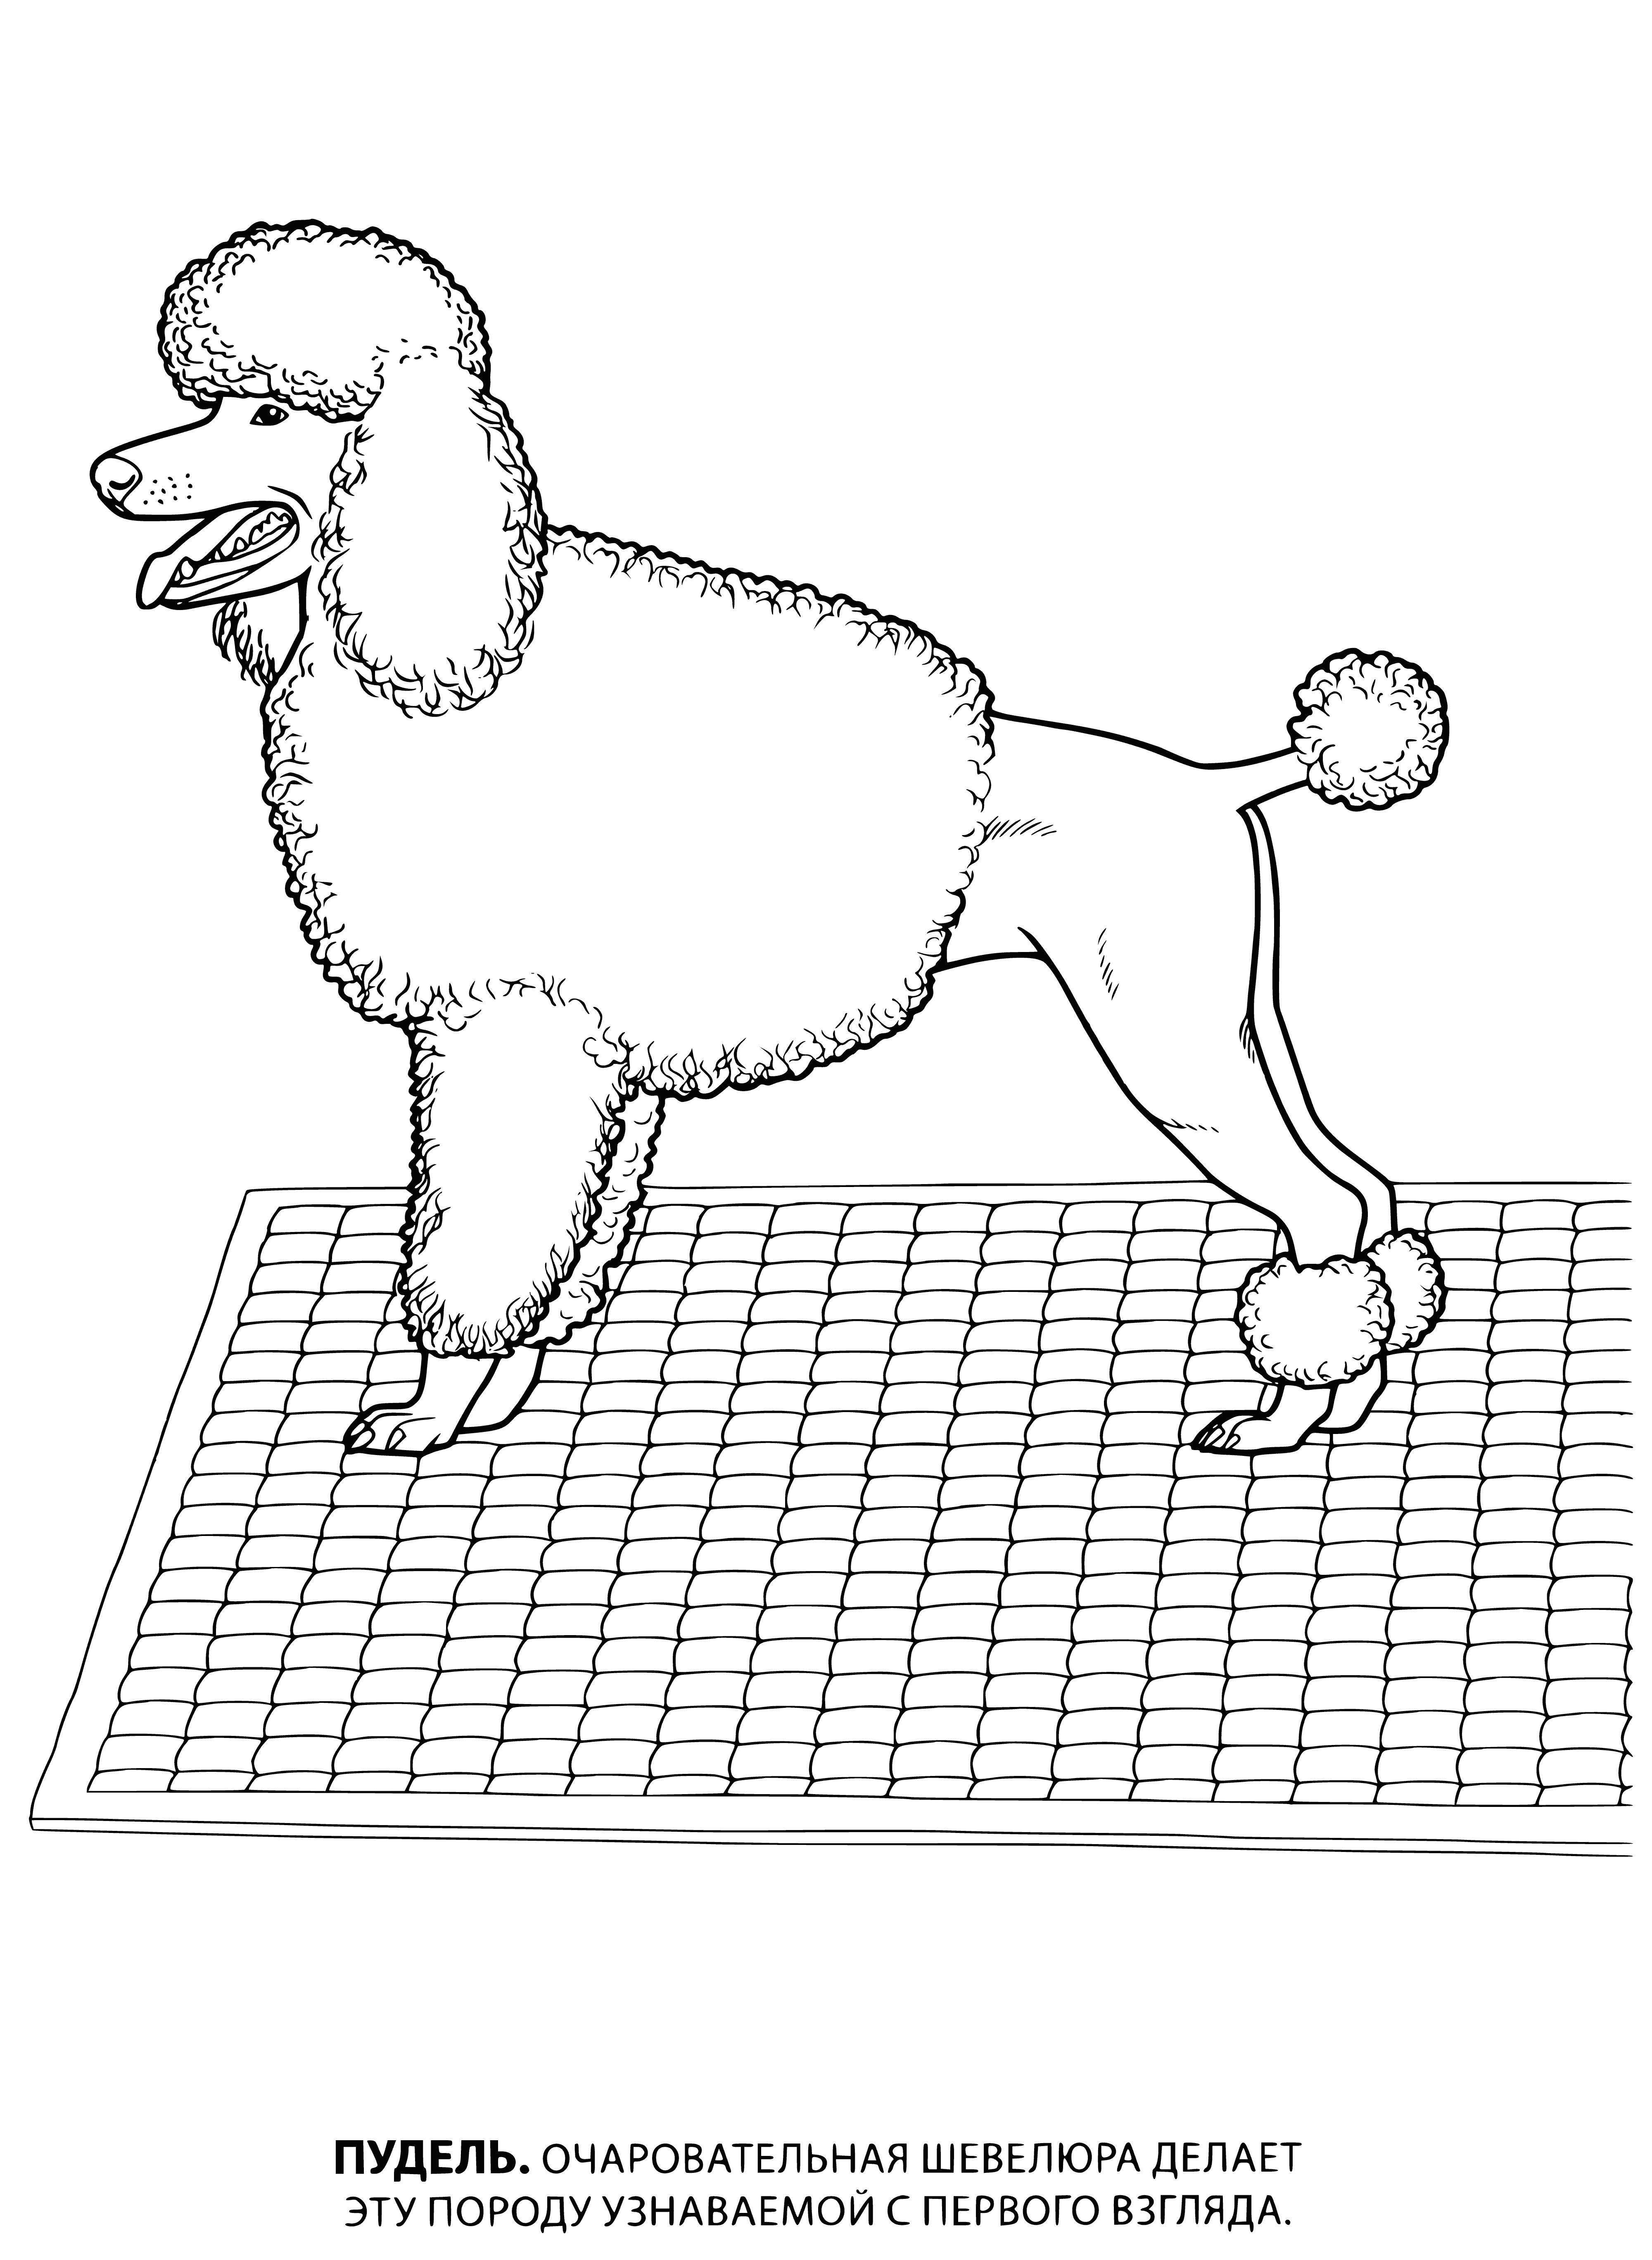 coloring page: Small to medium sized dog, dense and curly coat. Intelligent, active, and good at sports. #Poodle